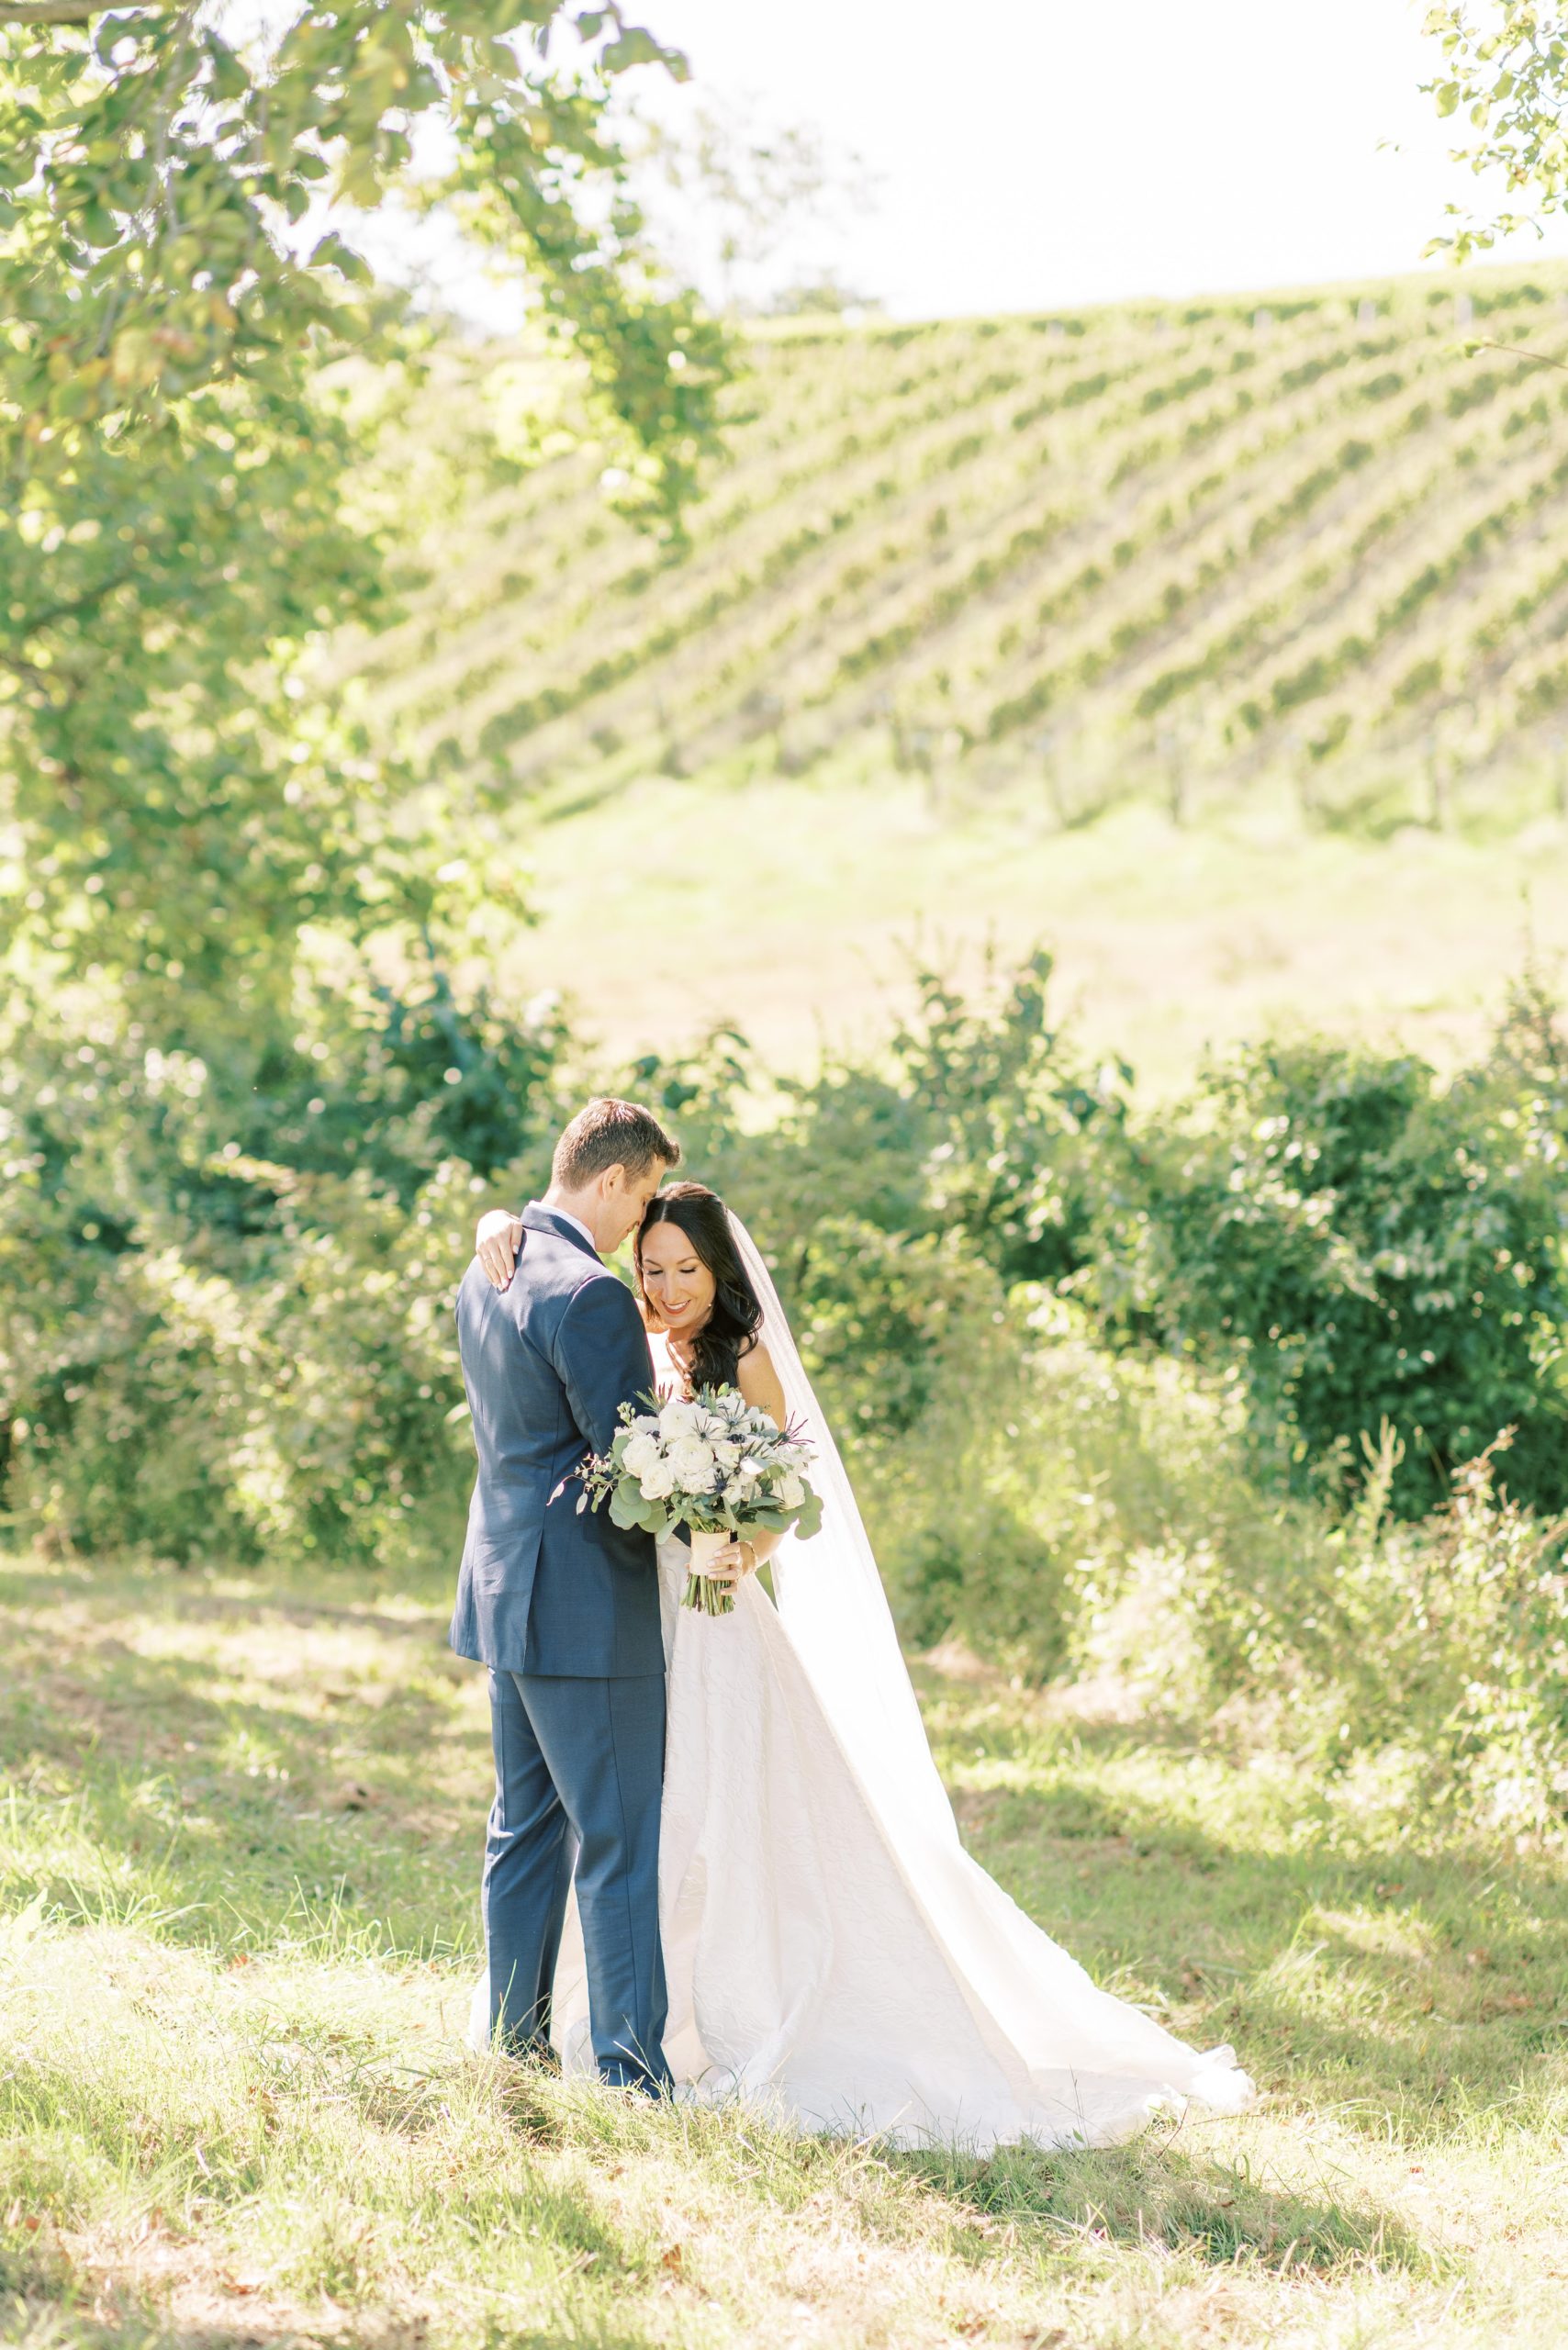 A beautiful outdoor ceremony and reception among the vines at Stone Tower Winery in Leesburg, Virignia, outside of Washington, DC.